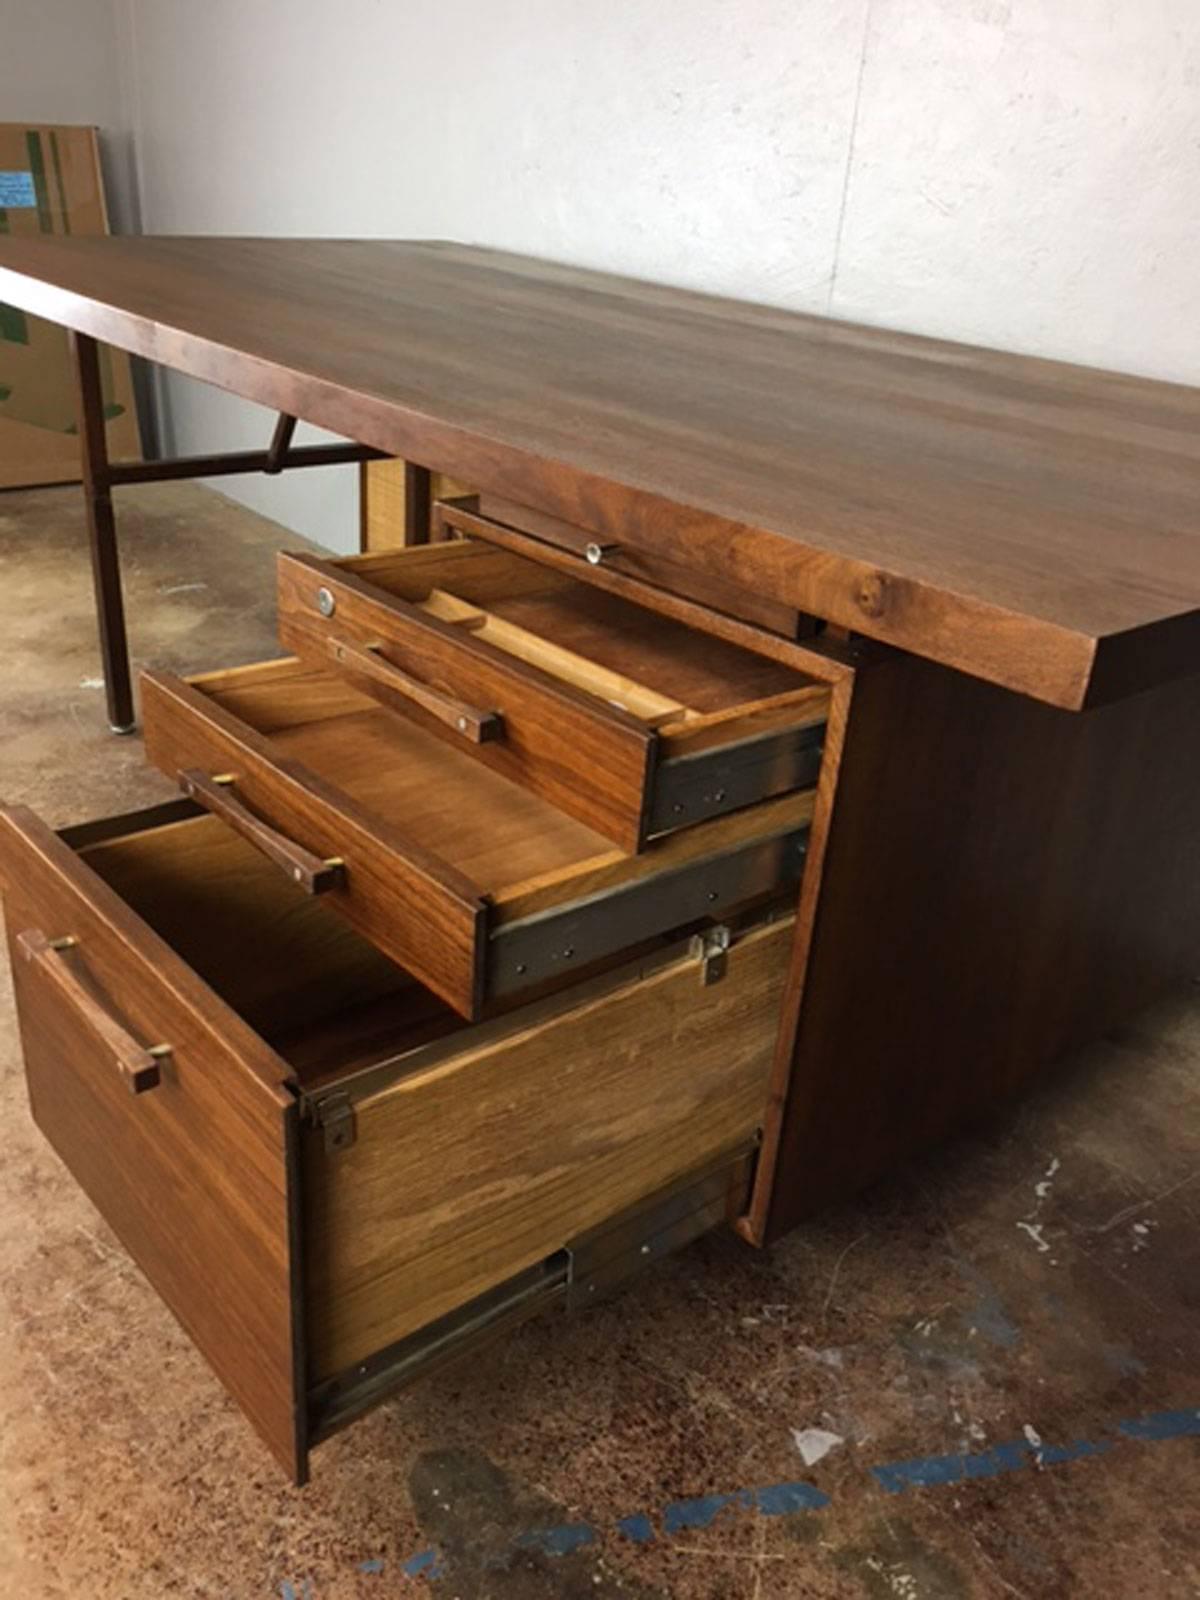 Very large executive desk with cane front modestry panel. Unattributed but believed to be Danish. Excellent craftsmanship. Fine walnut pulls.